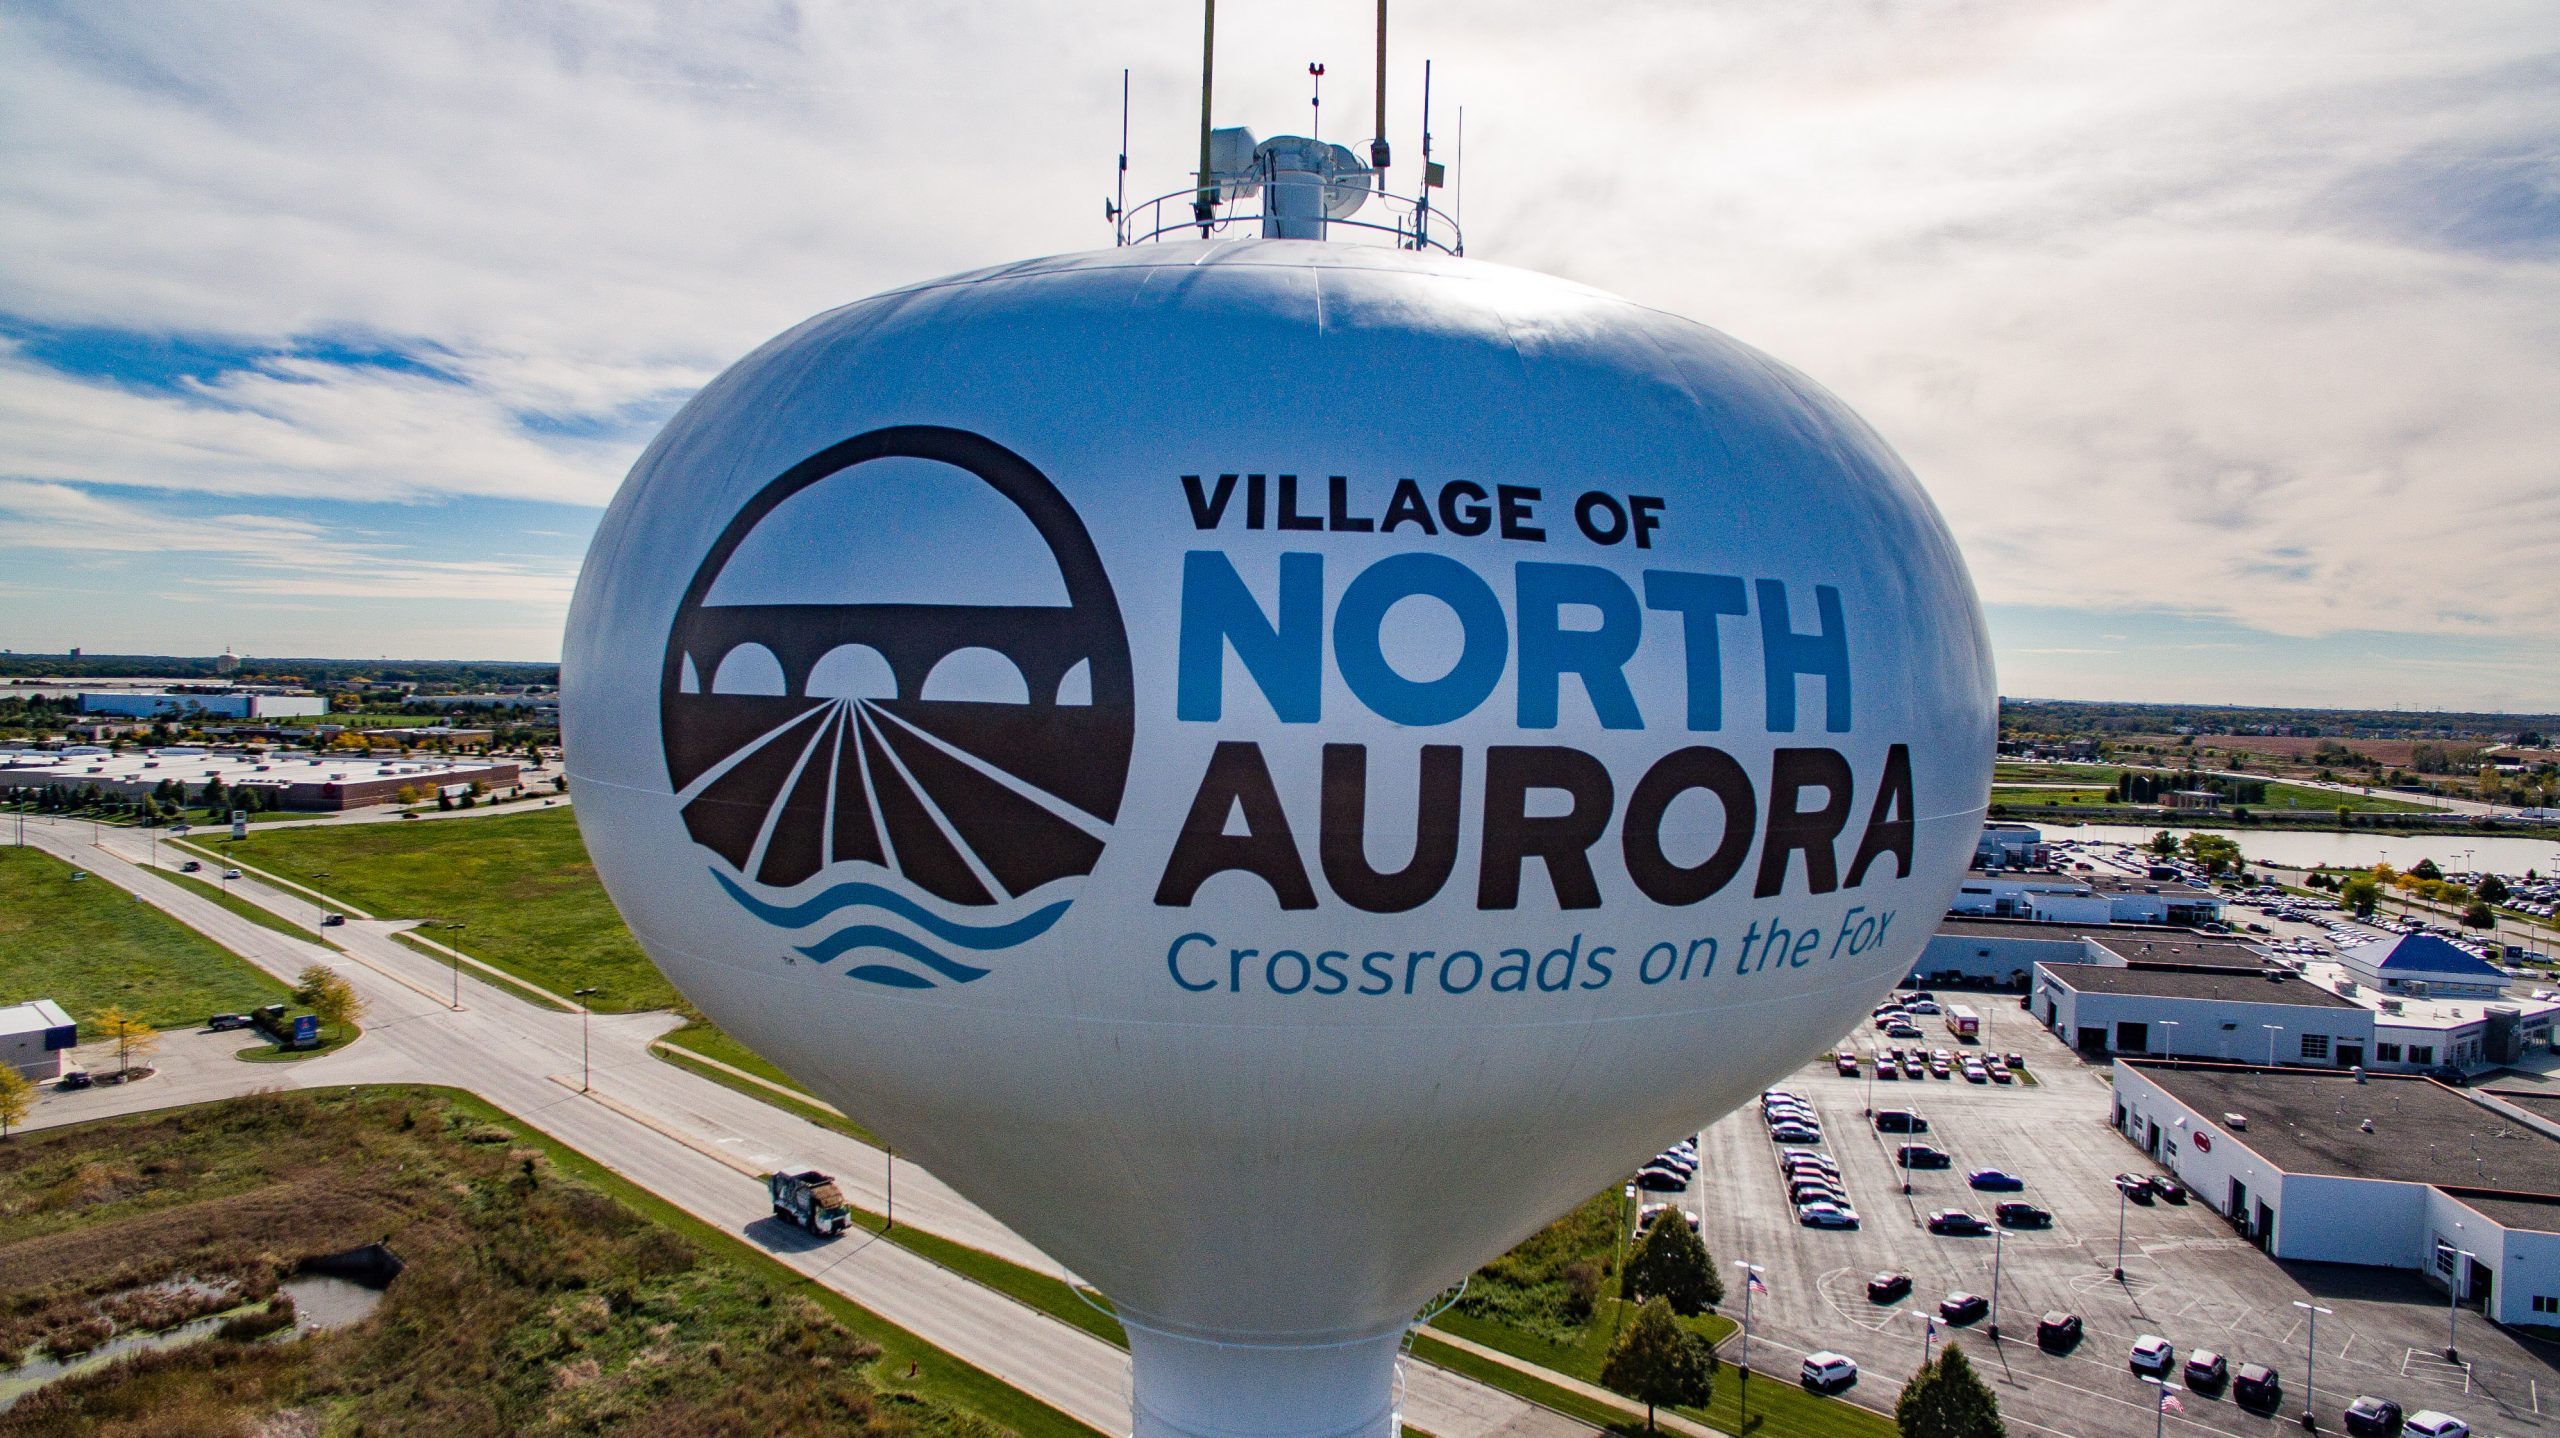 2021-water-quality-report-now-available-village-of-north-aurora